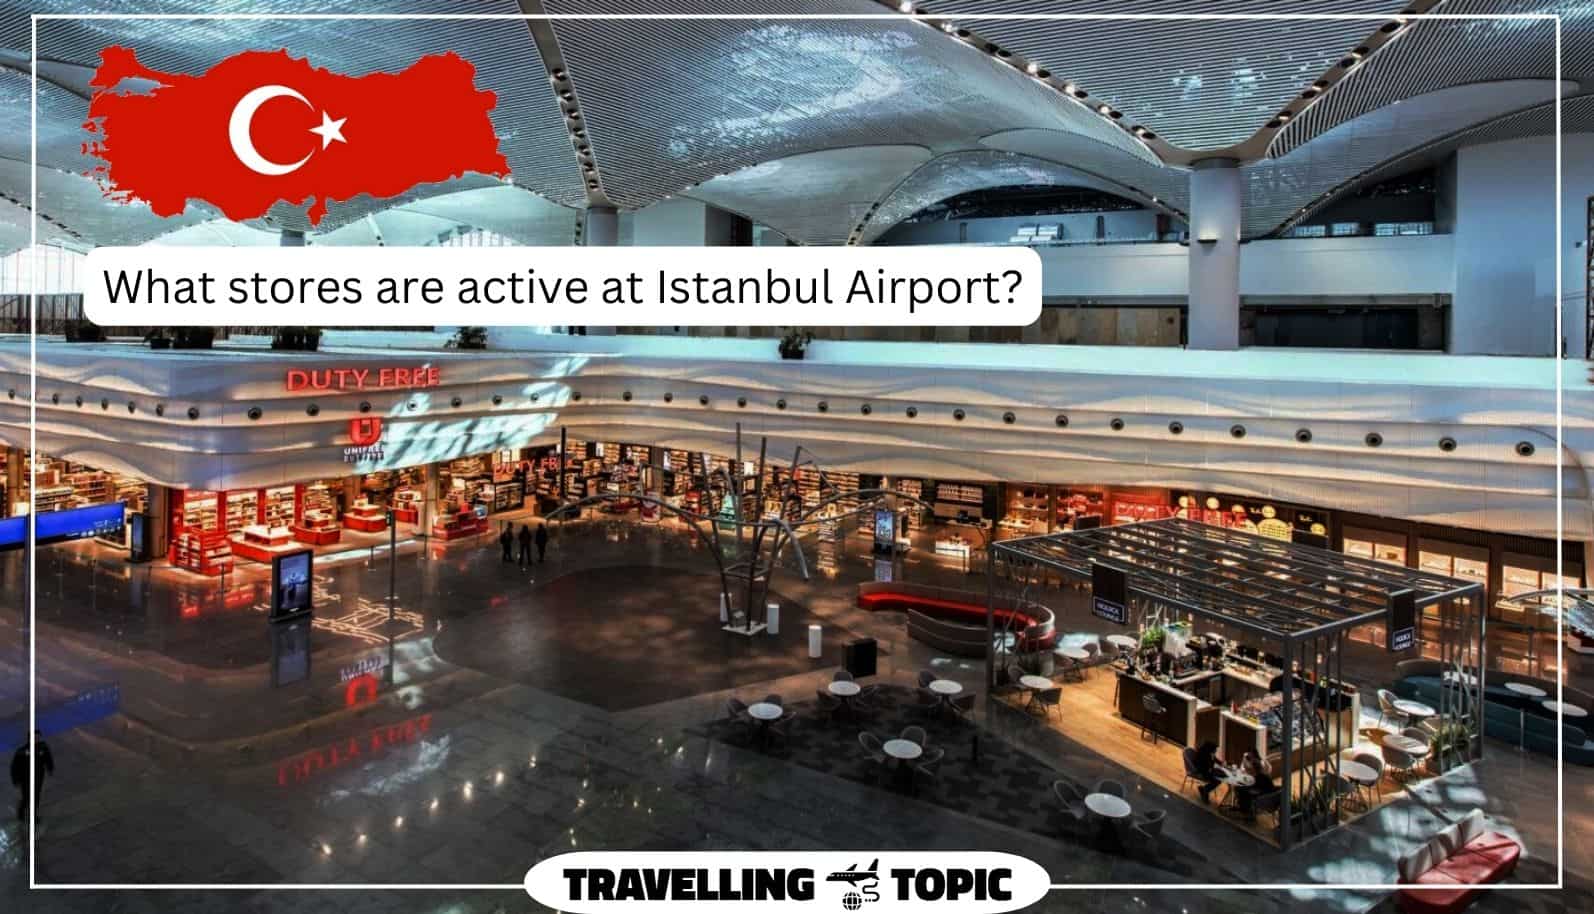 What stores are active at Istanbul Airport